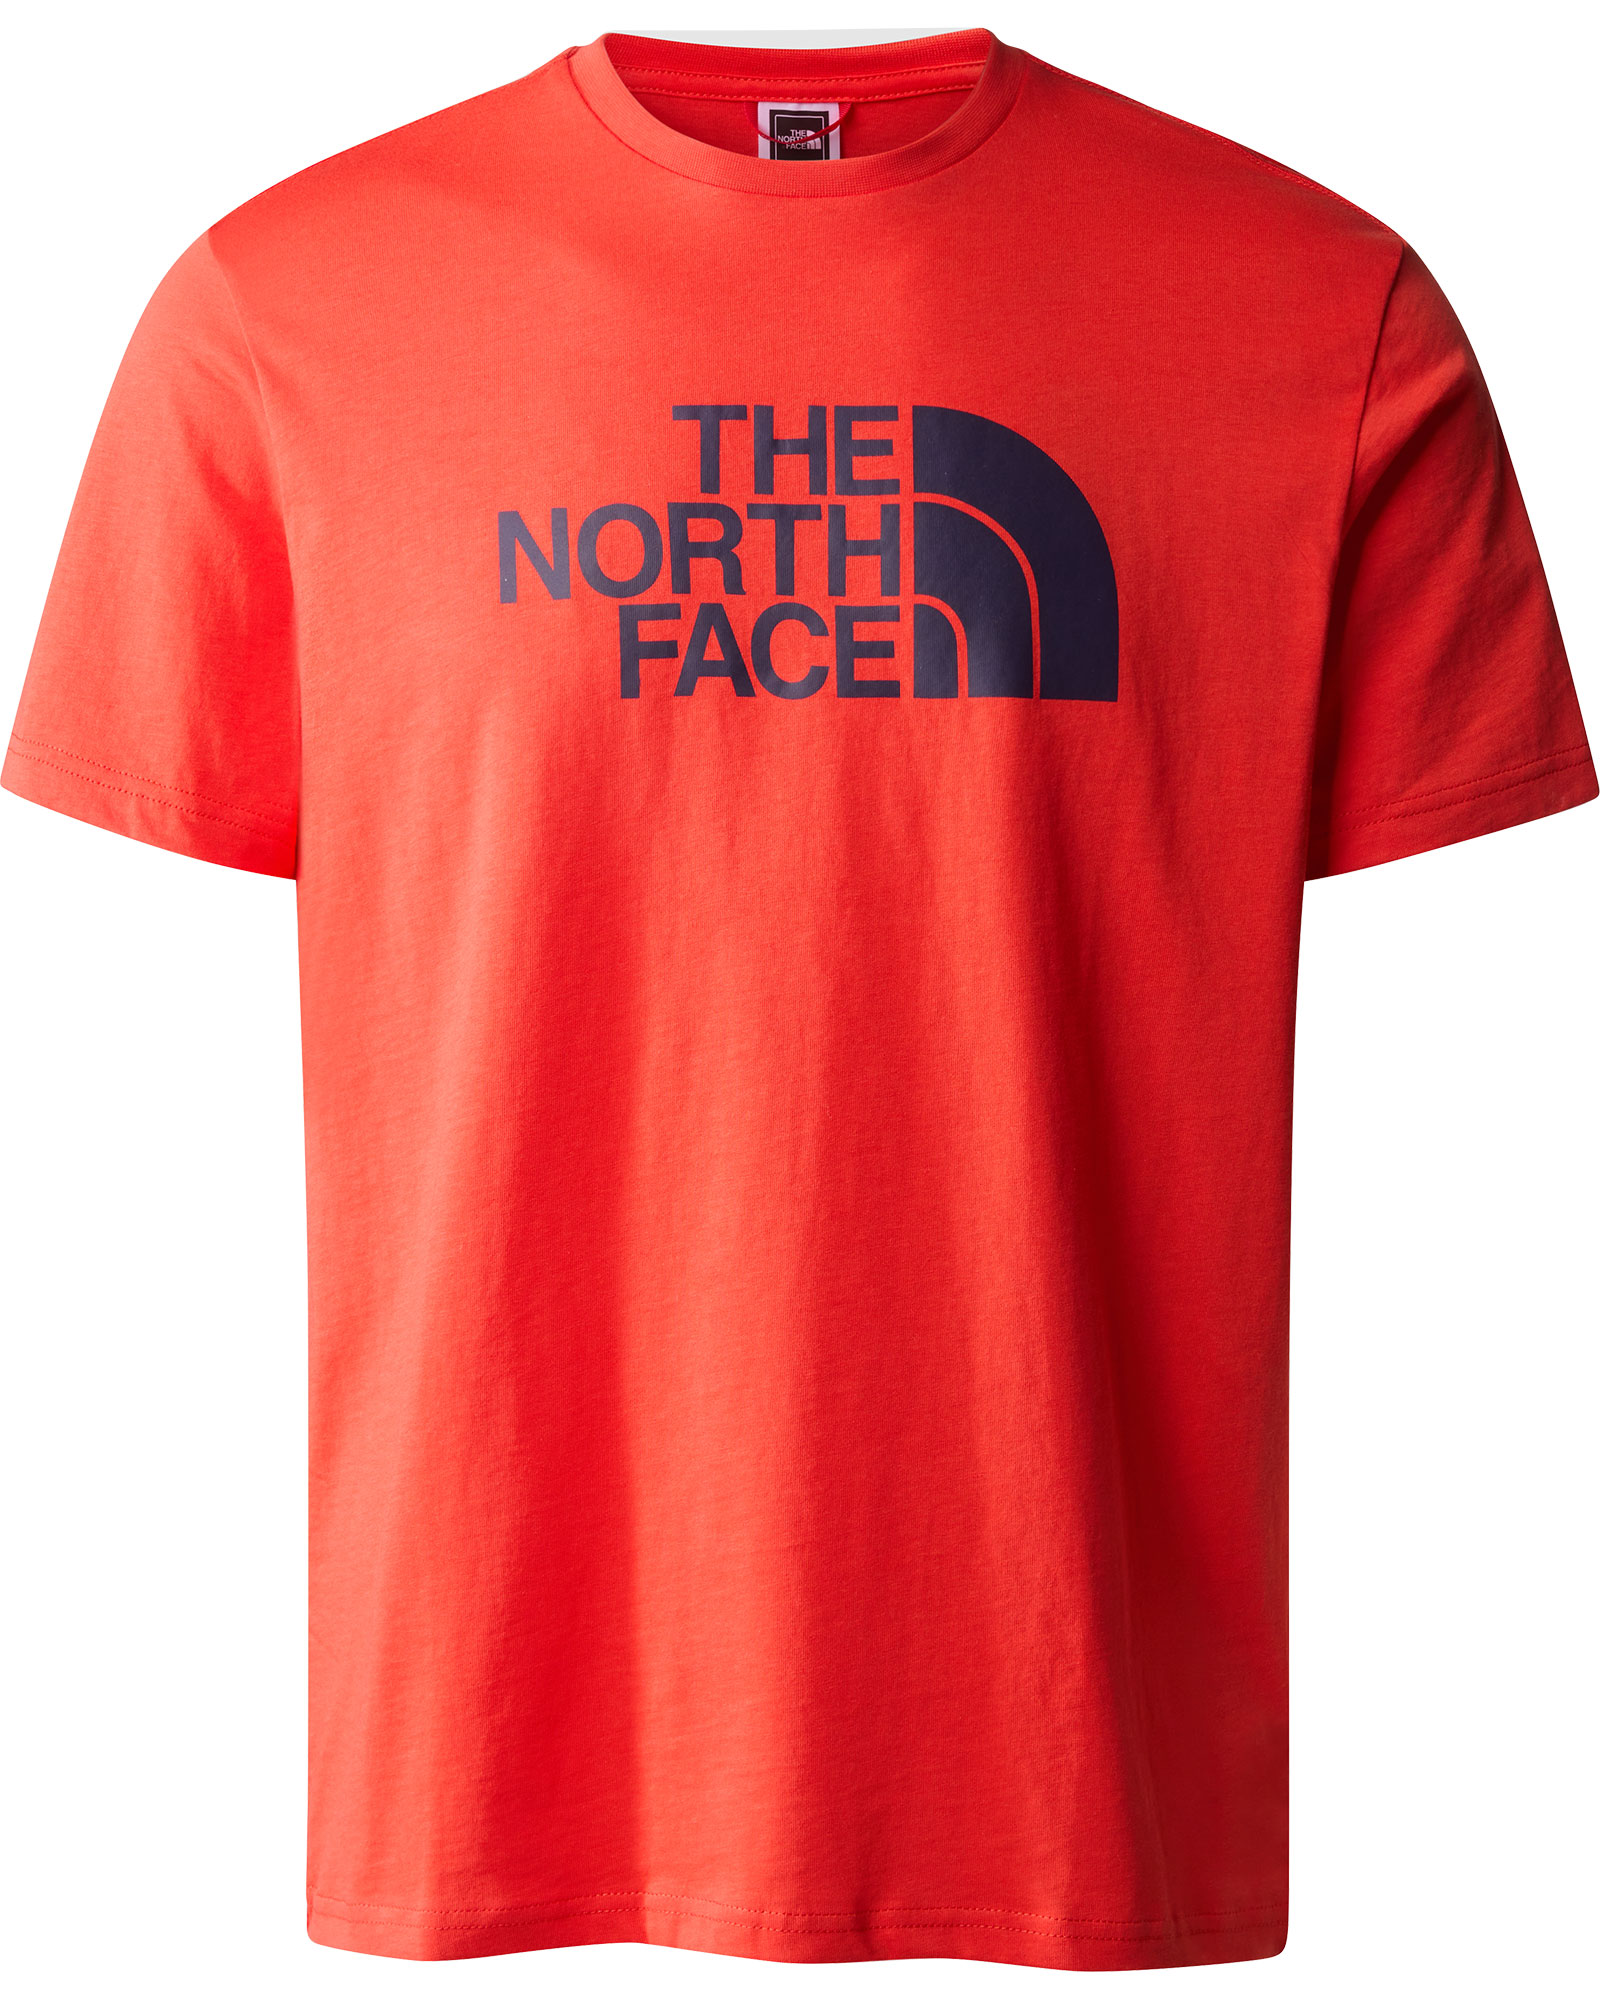 The North Face Easy Men’s T Shirt - Fiery Red M